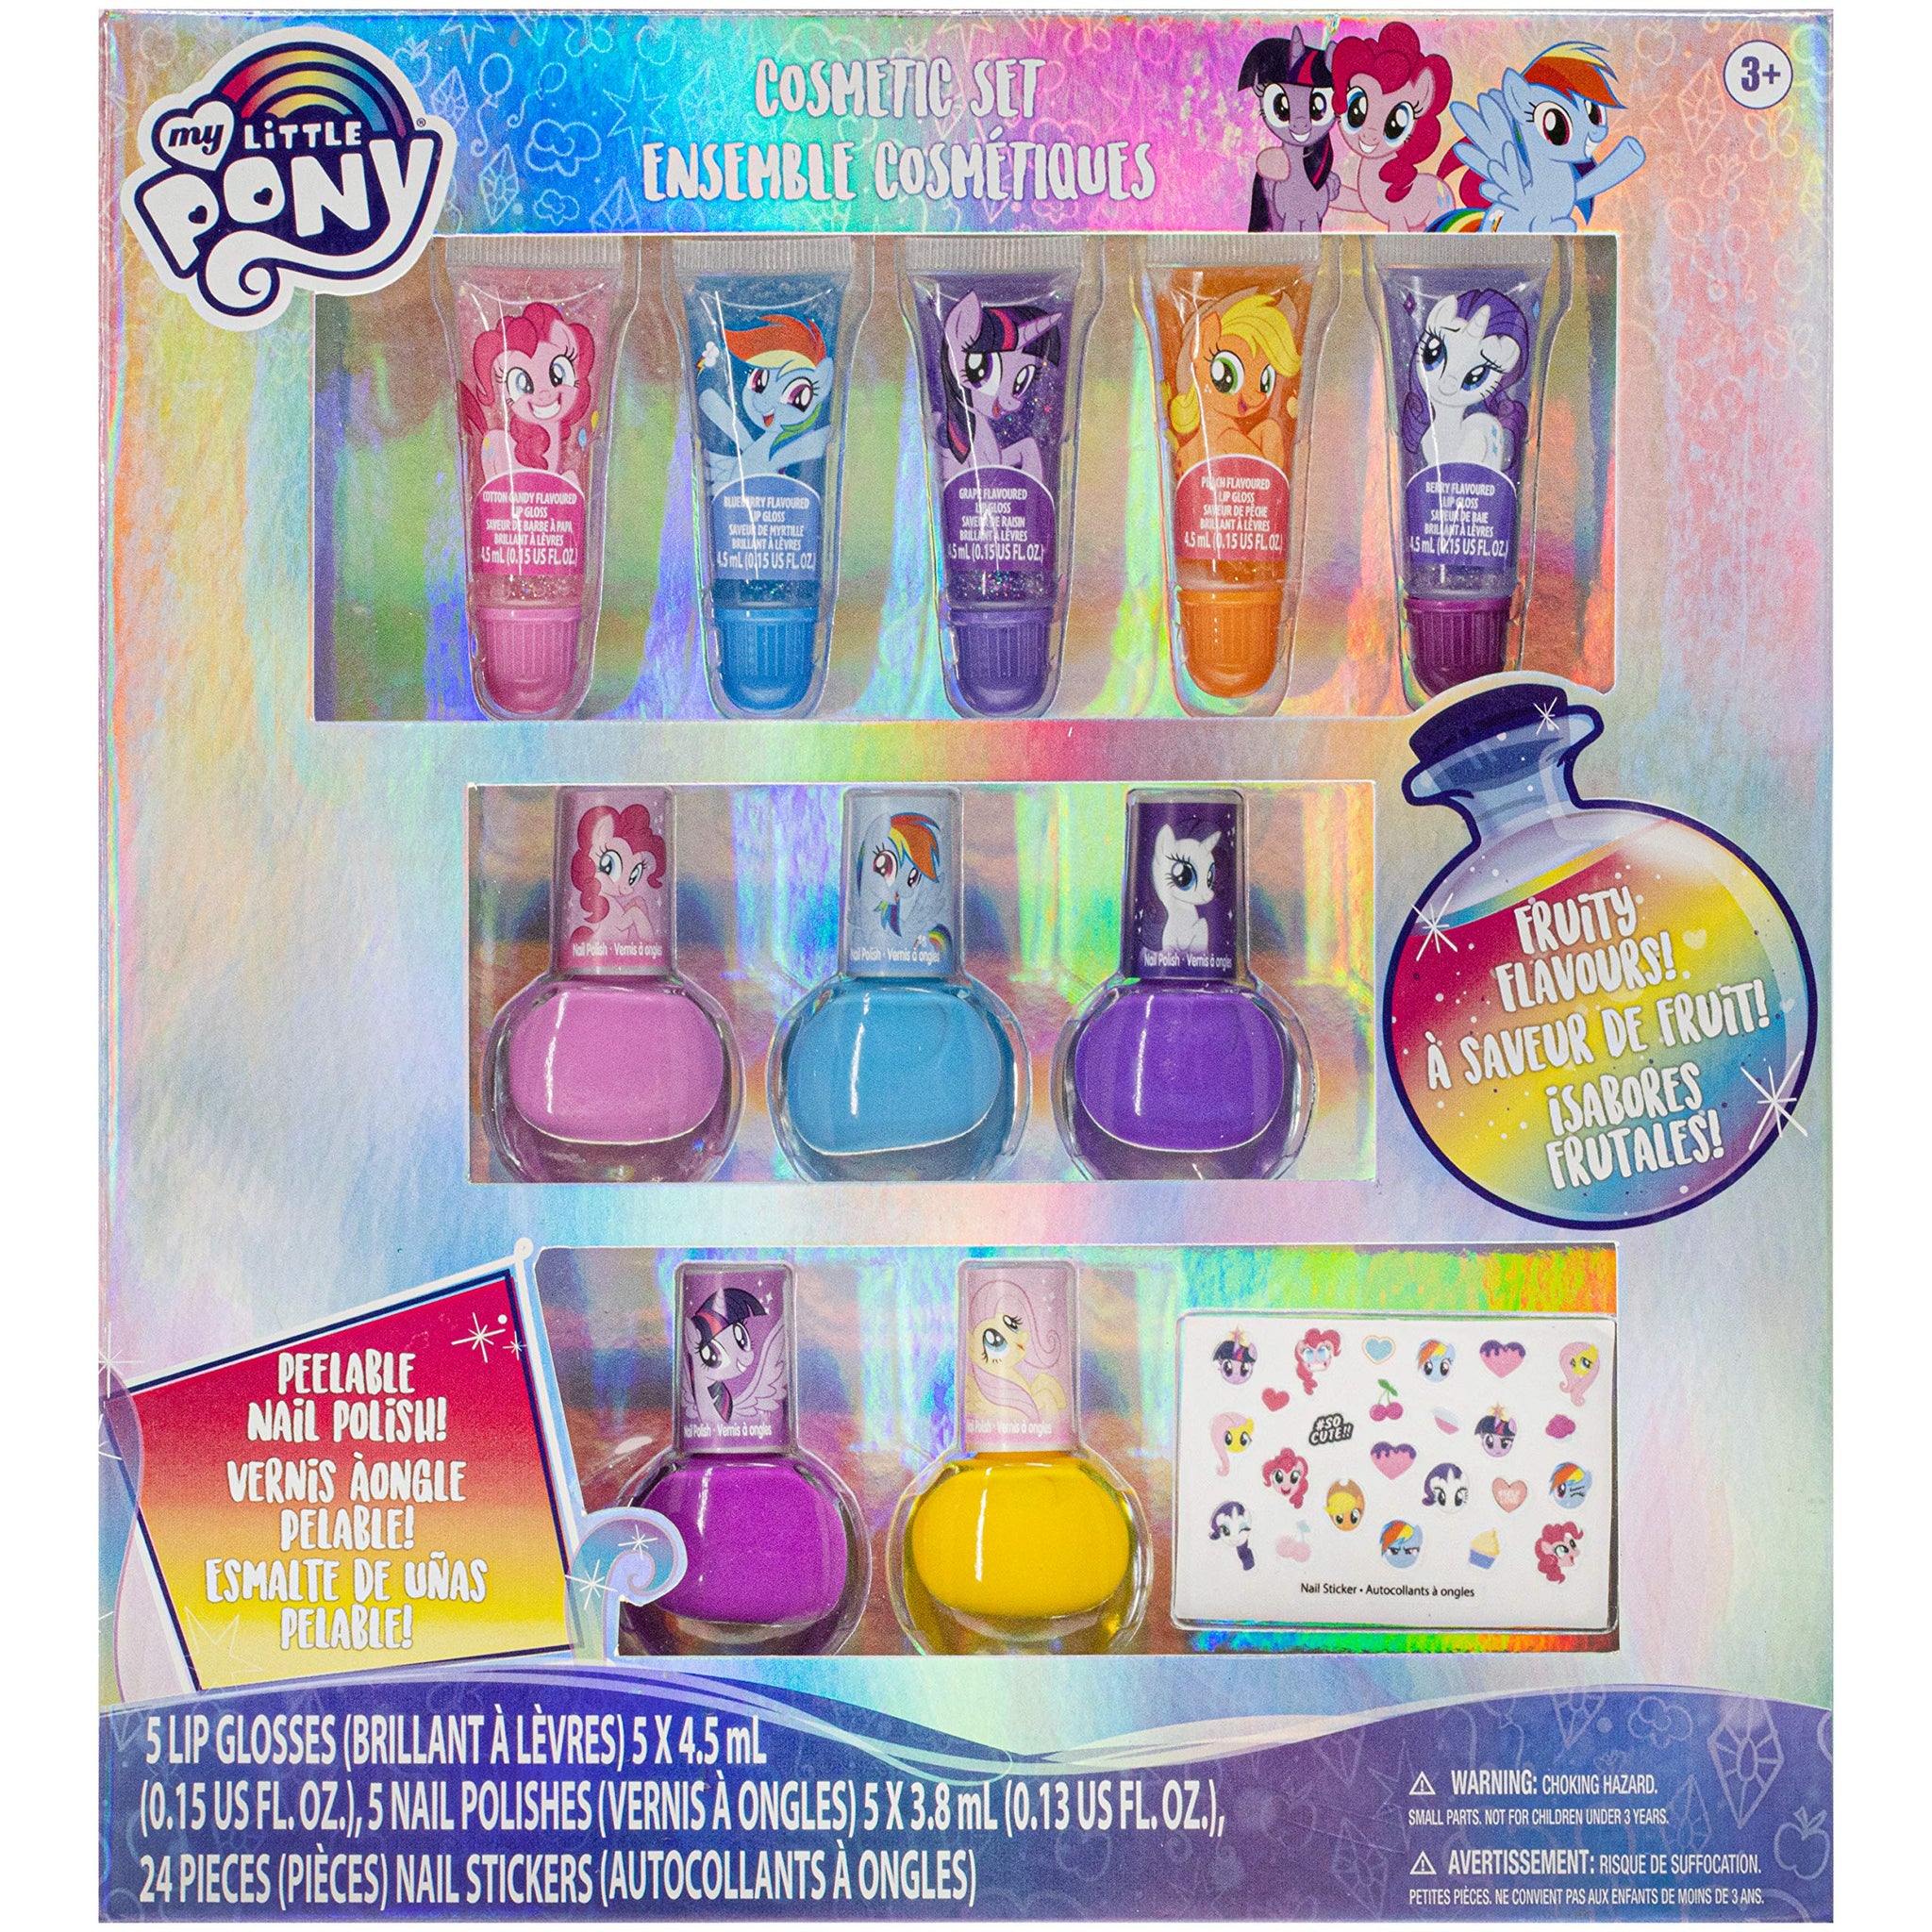 Snapklik.com : Disney Stitch Non-Toxic Peel-Off Water-Based Safe Quick Dry Nail  Polish Gift Kit Set For Kids Tweens Girls, Shimmer And Opaque Colors Ages 3+